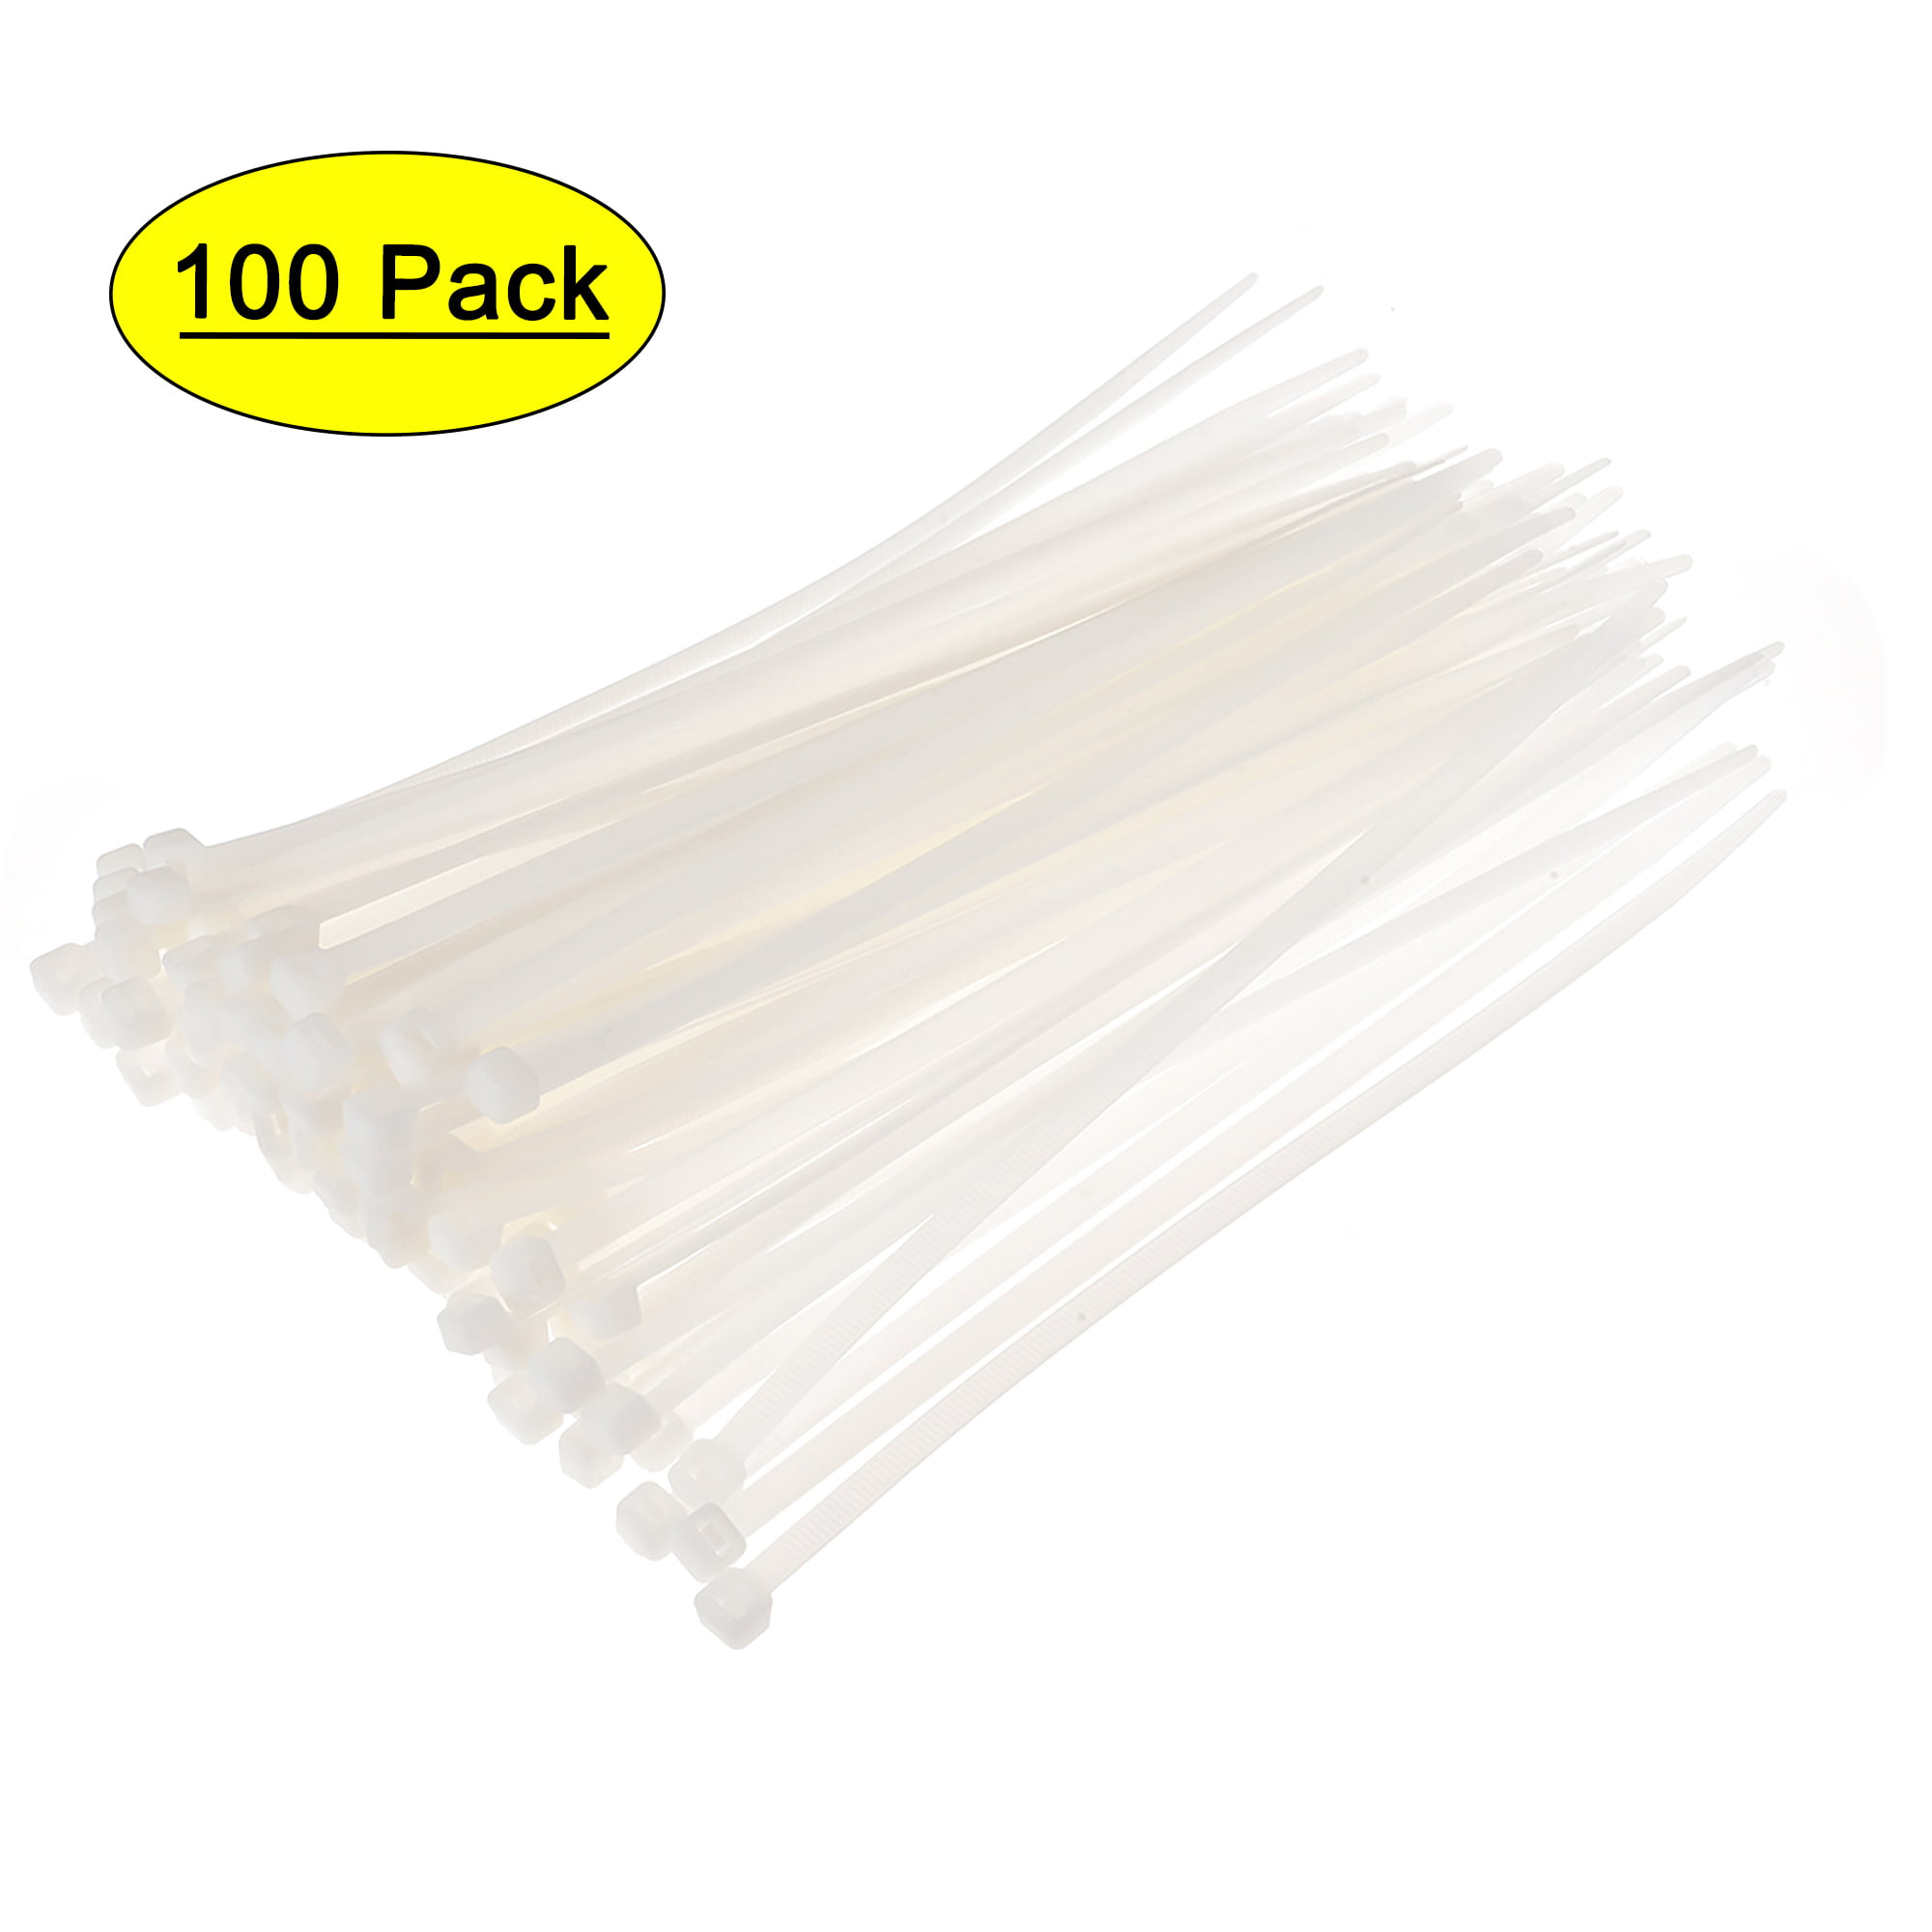 All Sizes & Colours Cable Ties Nylon Zip Tie Wraps Strong Long 20% DISCOUNT 